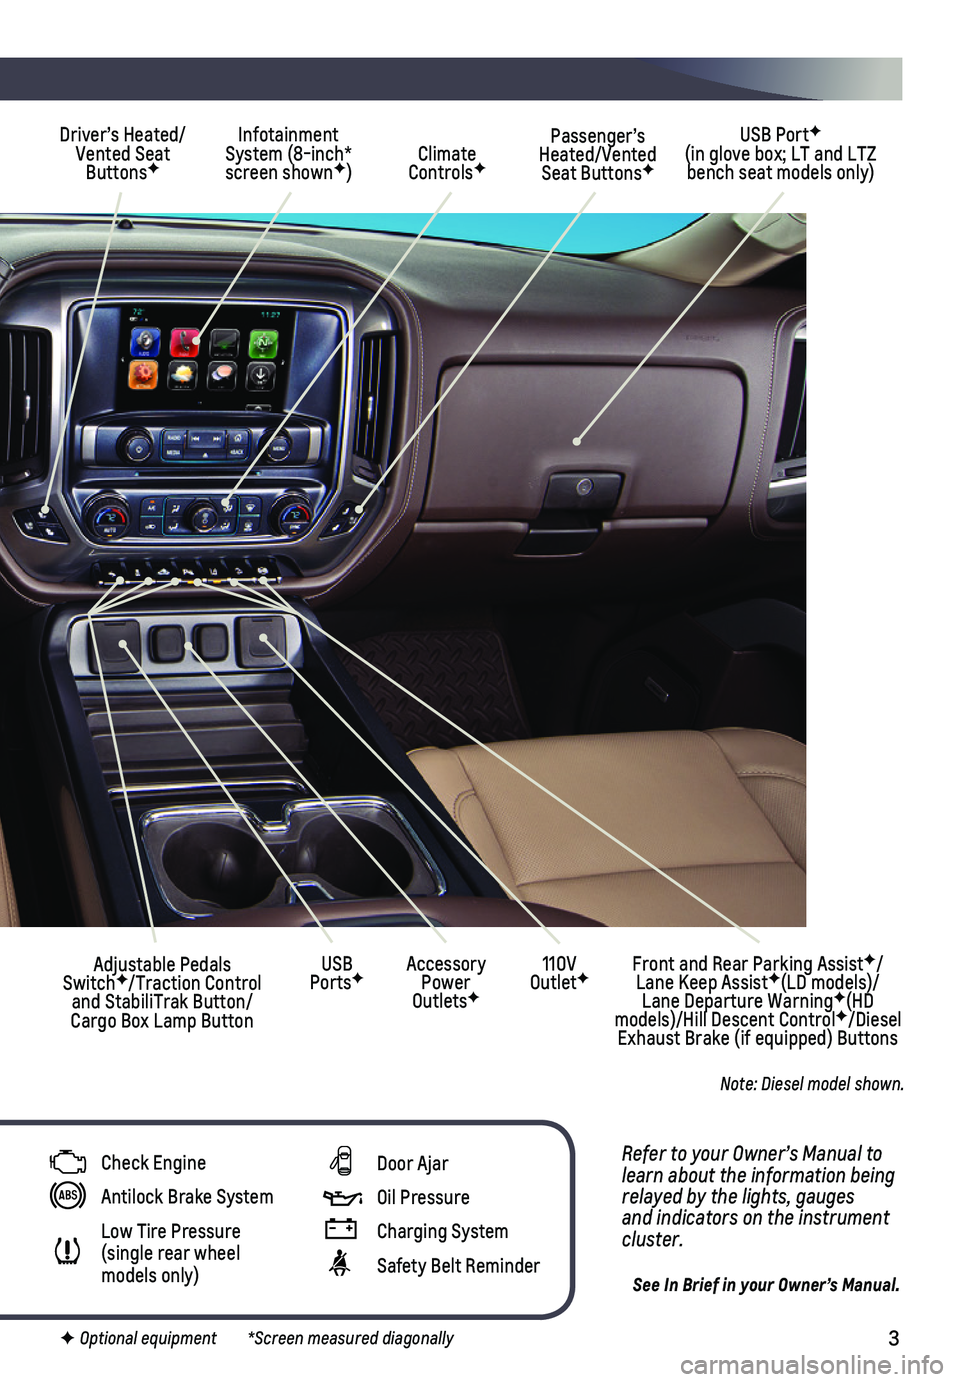 CHEVROLET SILVERADO 2018  Get To Know Guide 3
Refer to your Owner’s Manual to learn about the information being relayed by the lights, gauges and indicators on the instrument cluster.
See In Brief in your Owner’s Manual.
Driver’s Heated/V